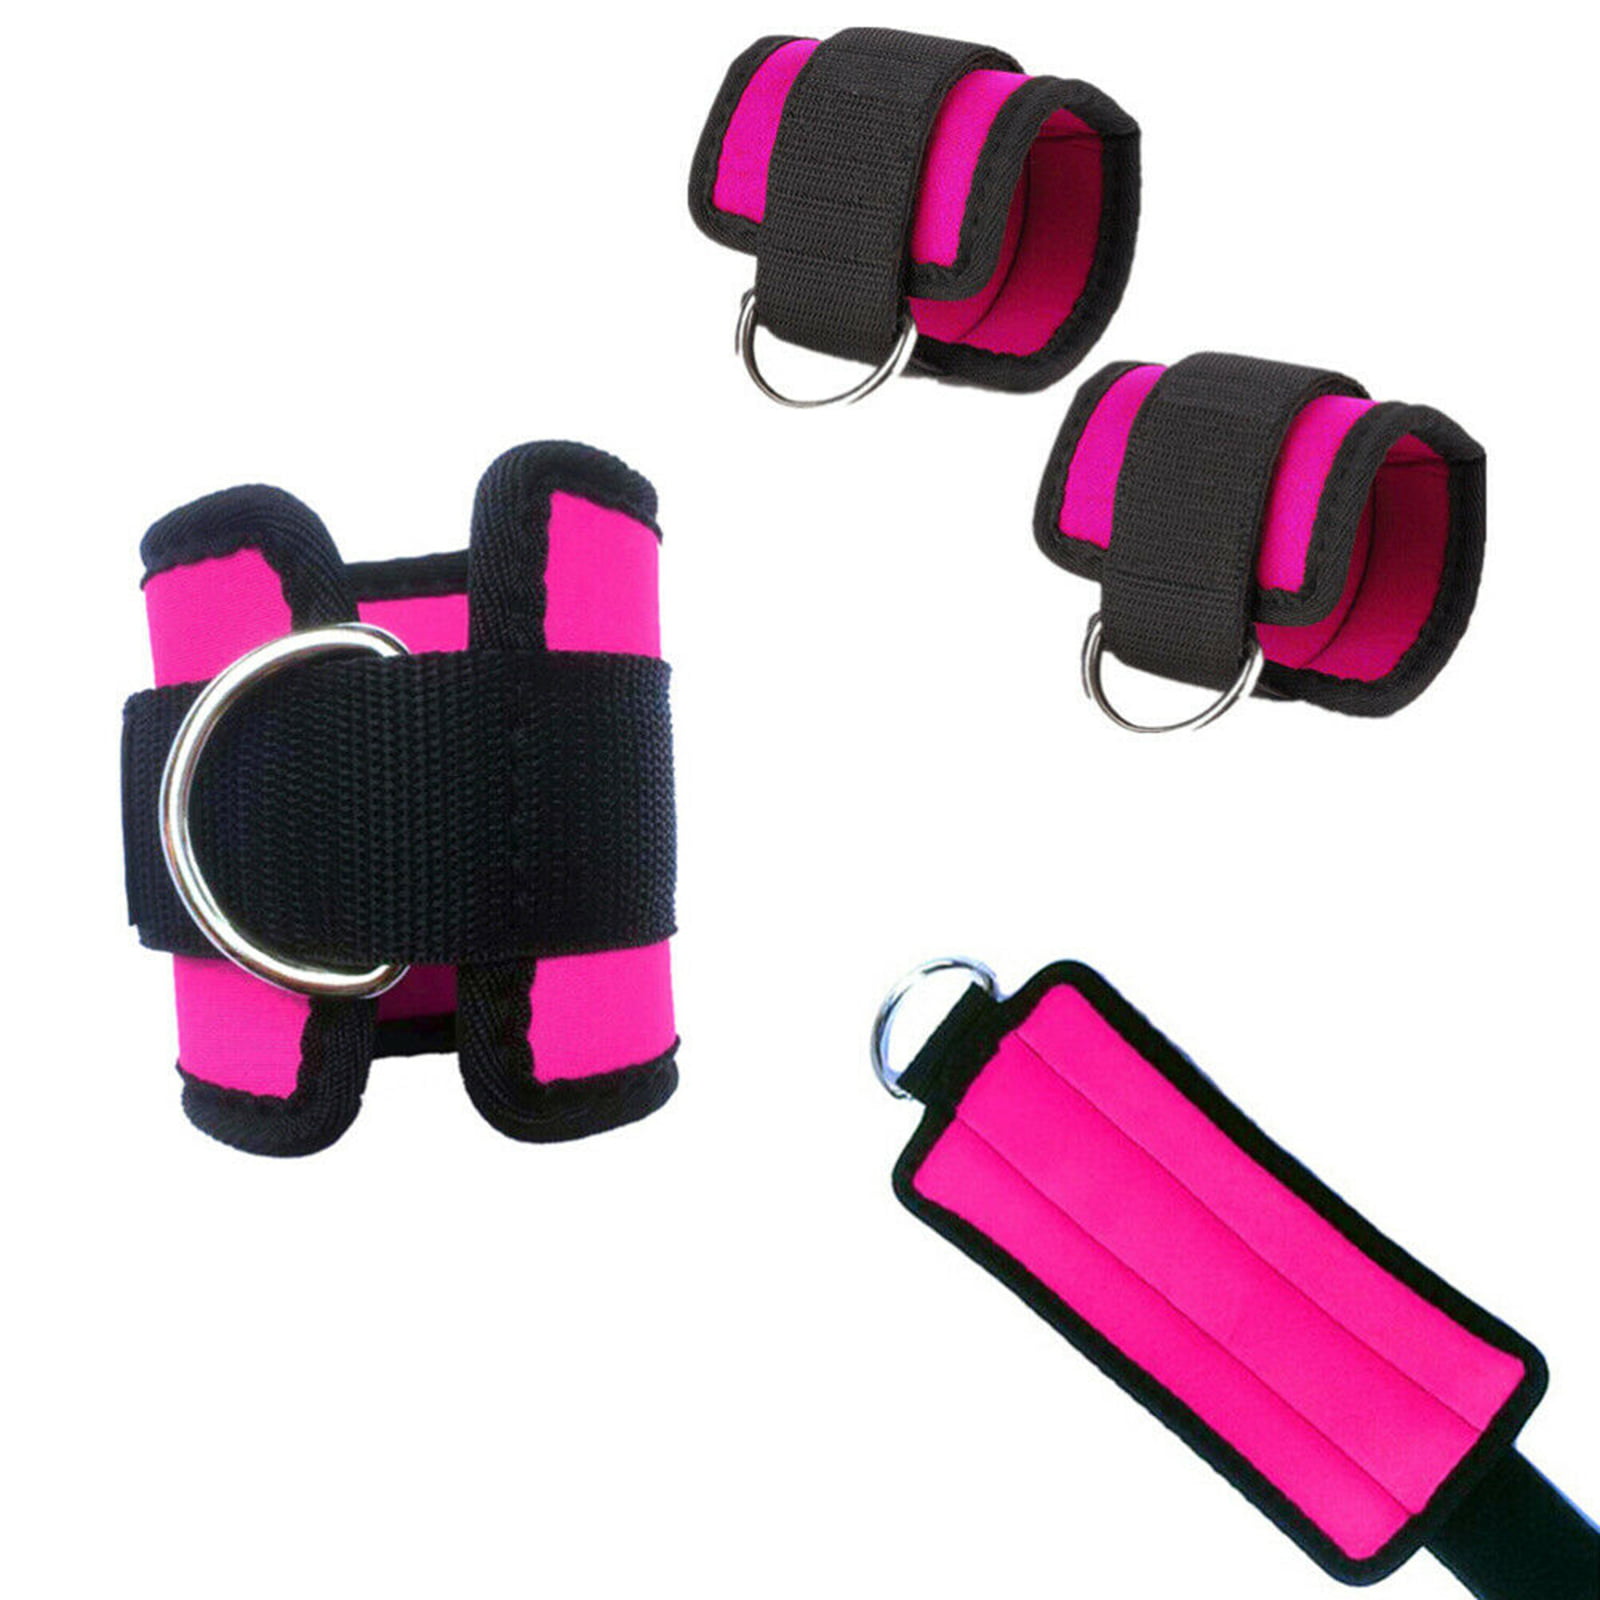 2pcs Ankle Weights Adjustable Leg Wrist Strap Running Boxing Braclets Straps Gym 